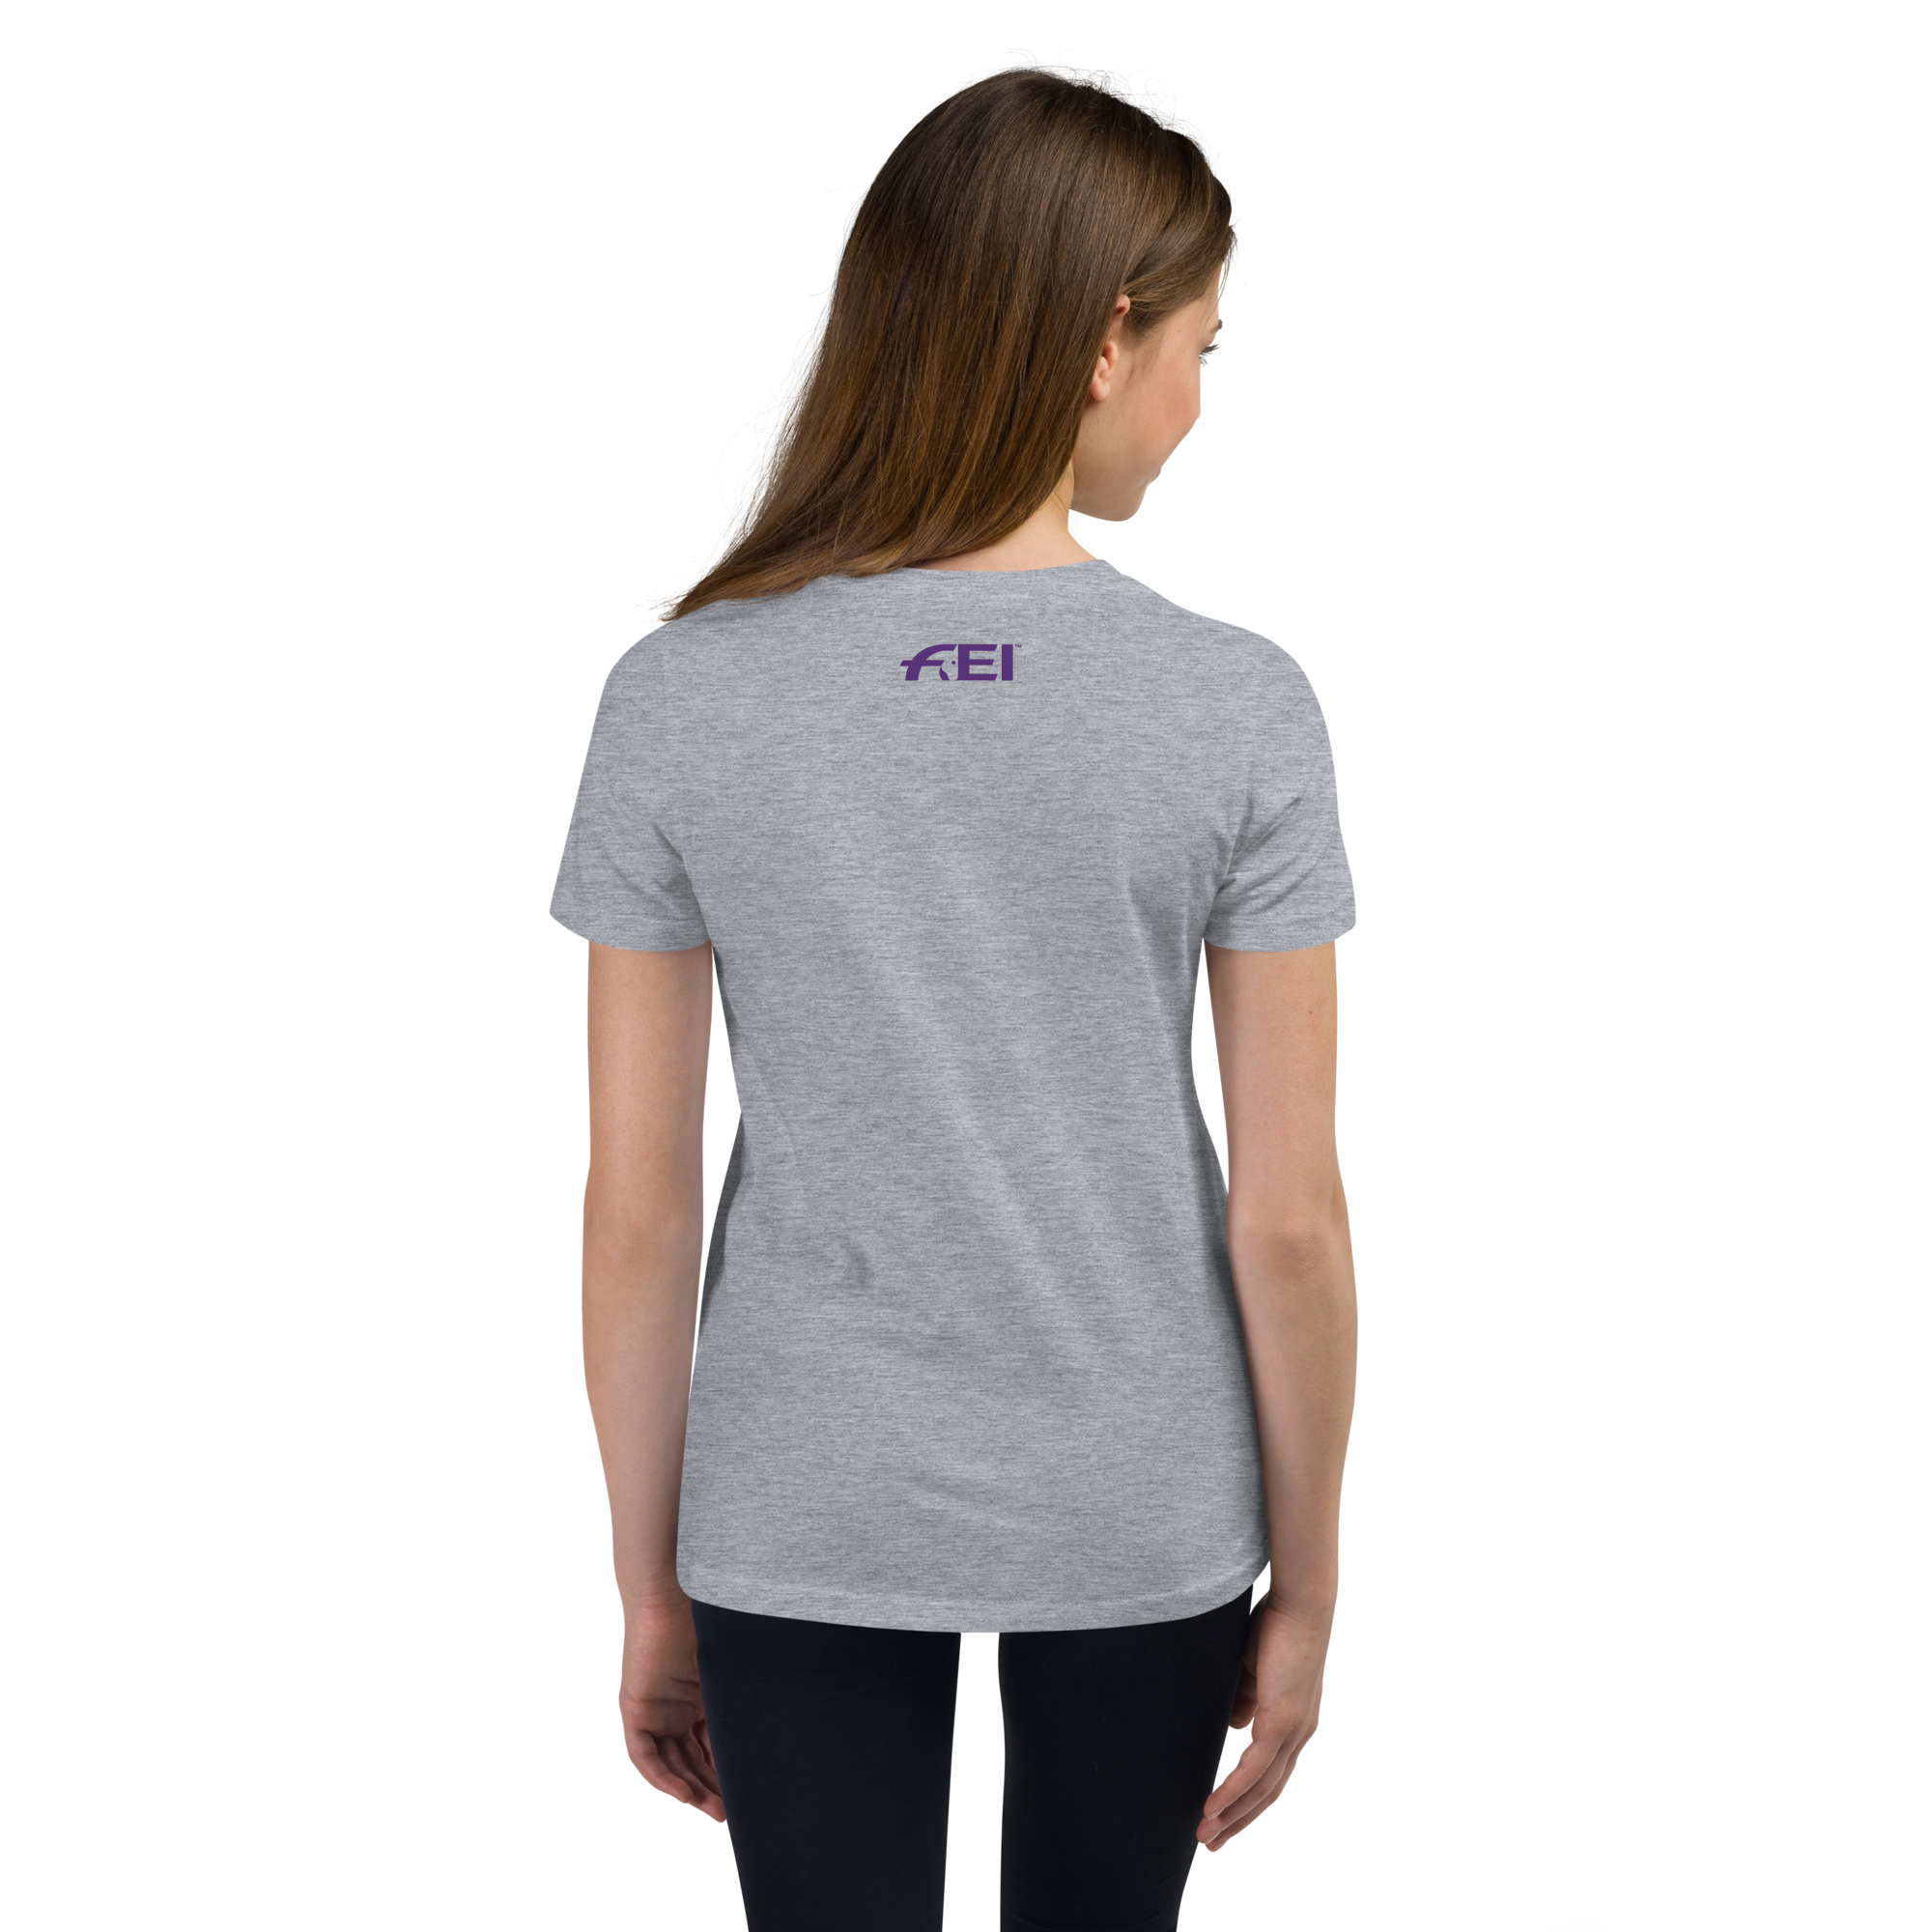 FEI Champony Pictogram Youth T-Shirt FEI Official Store